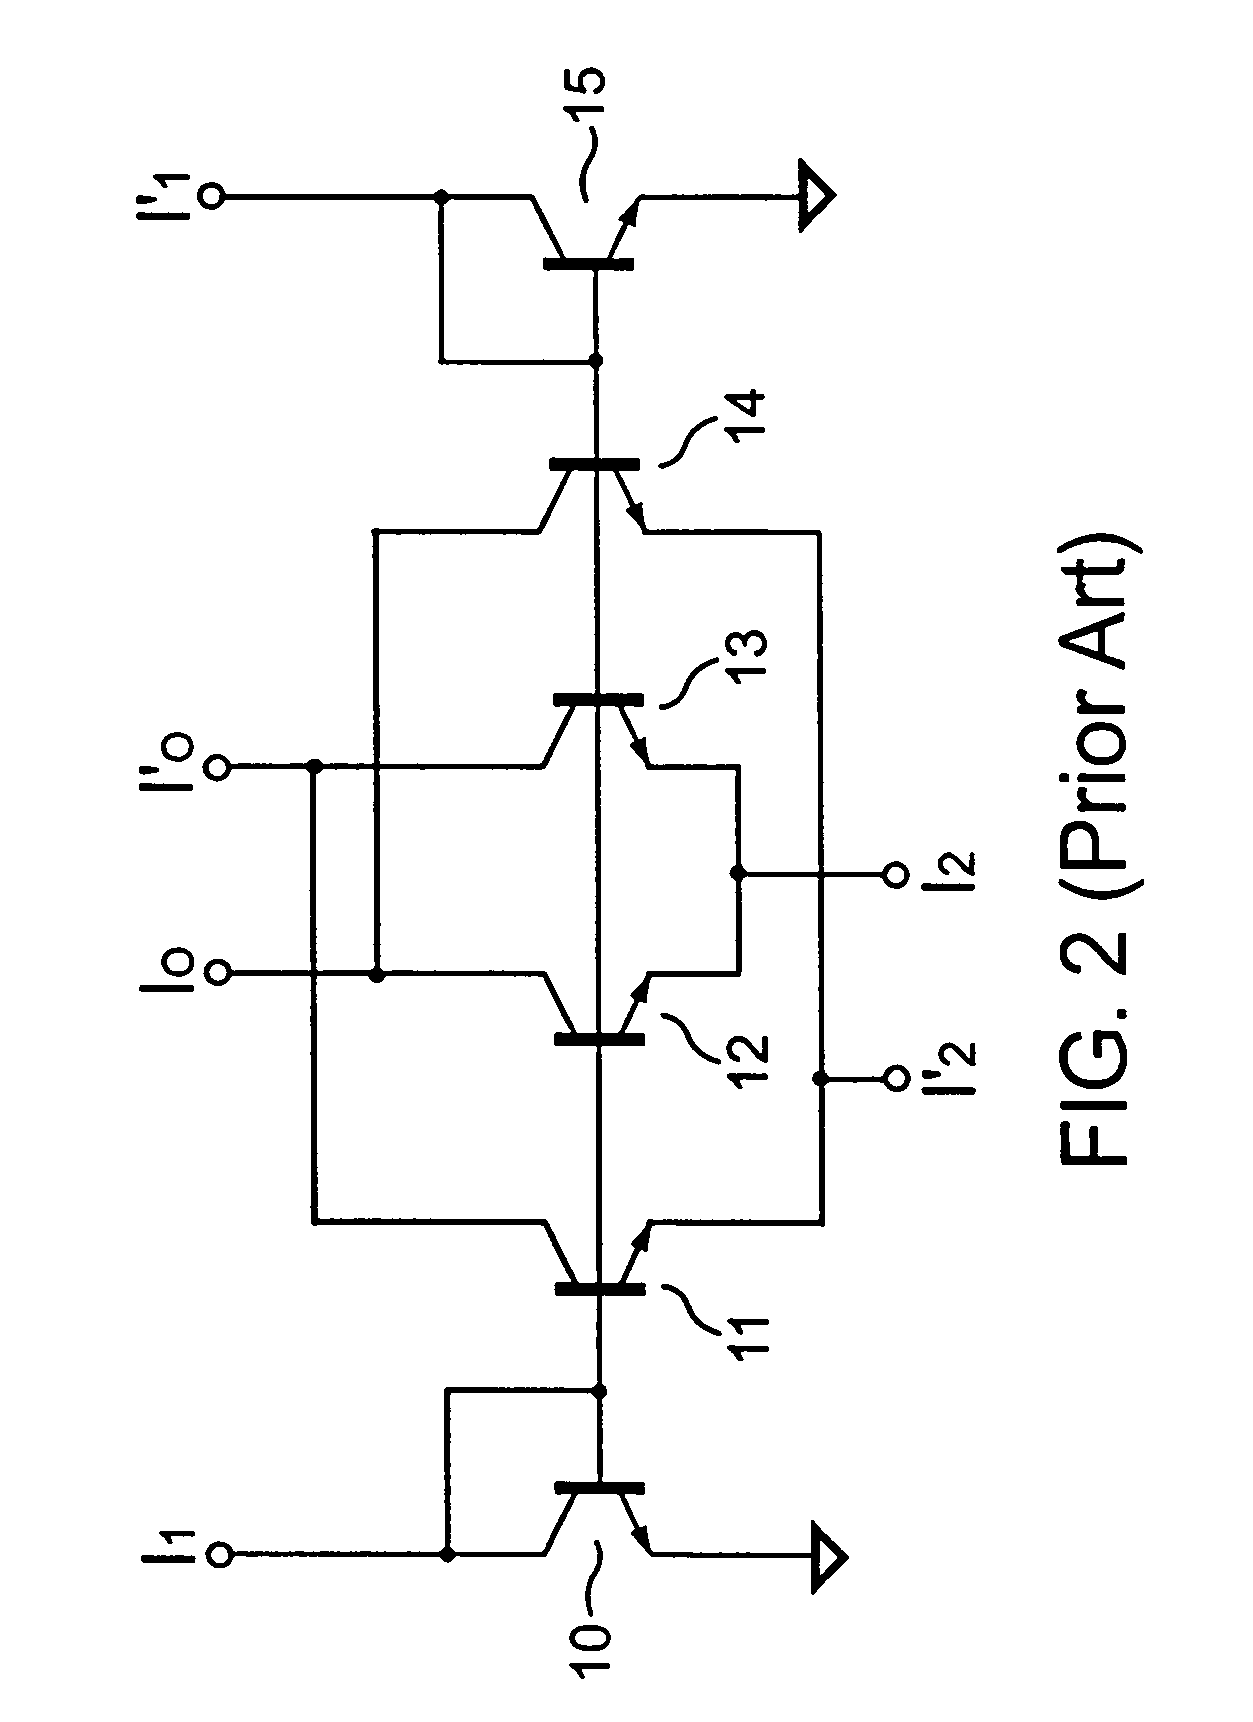 Multiplier-divider circuit for a PFC controller